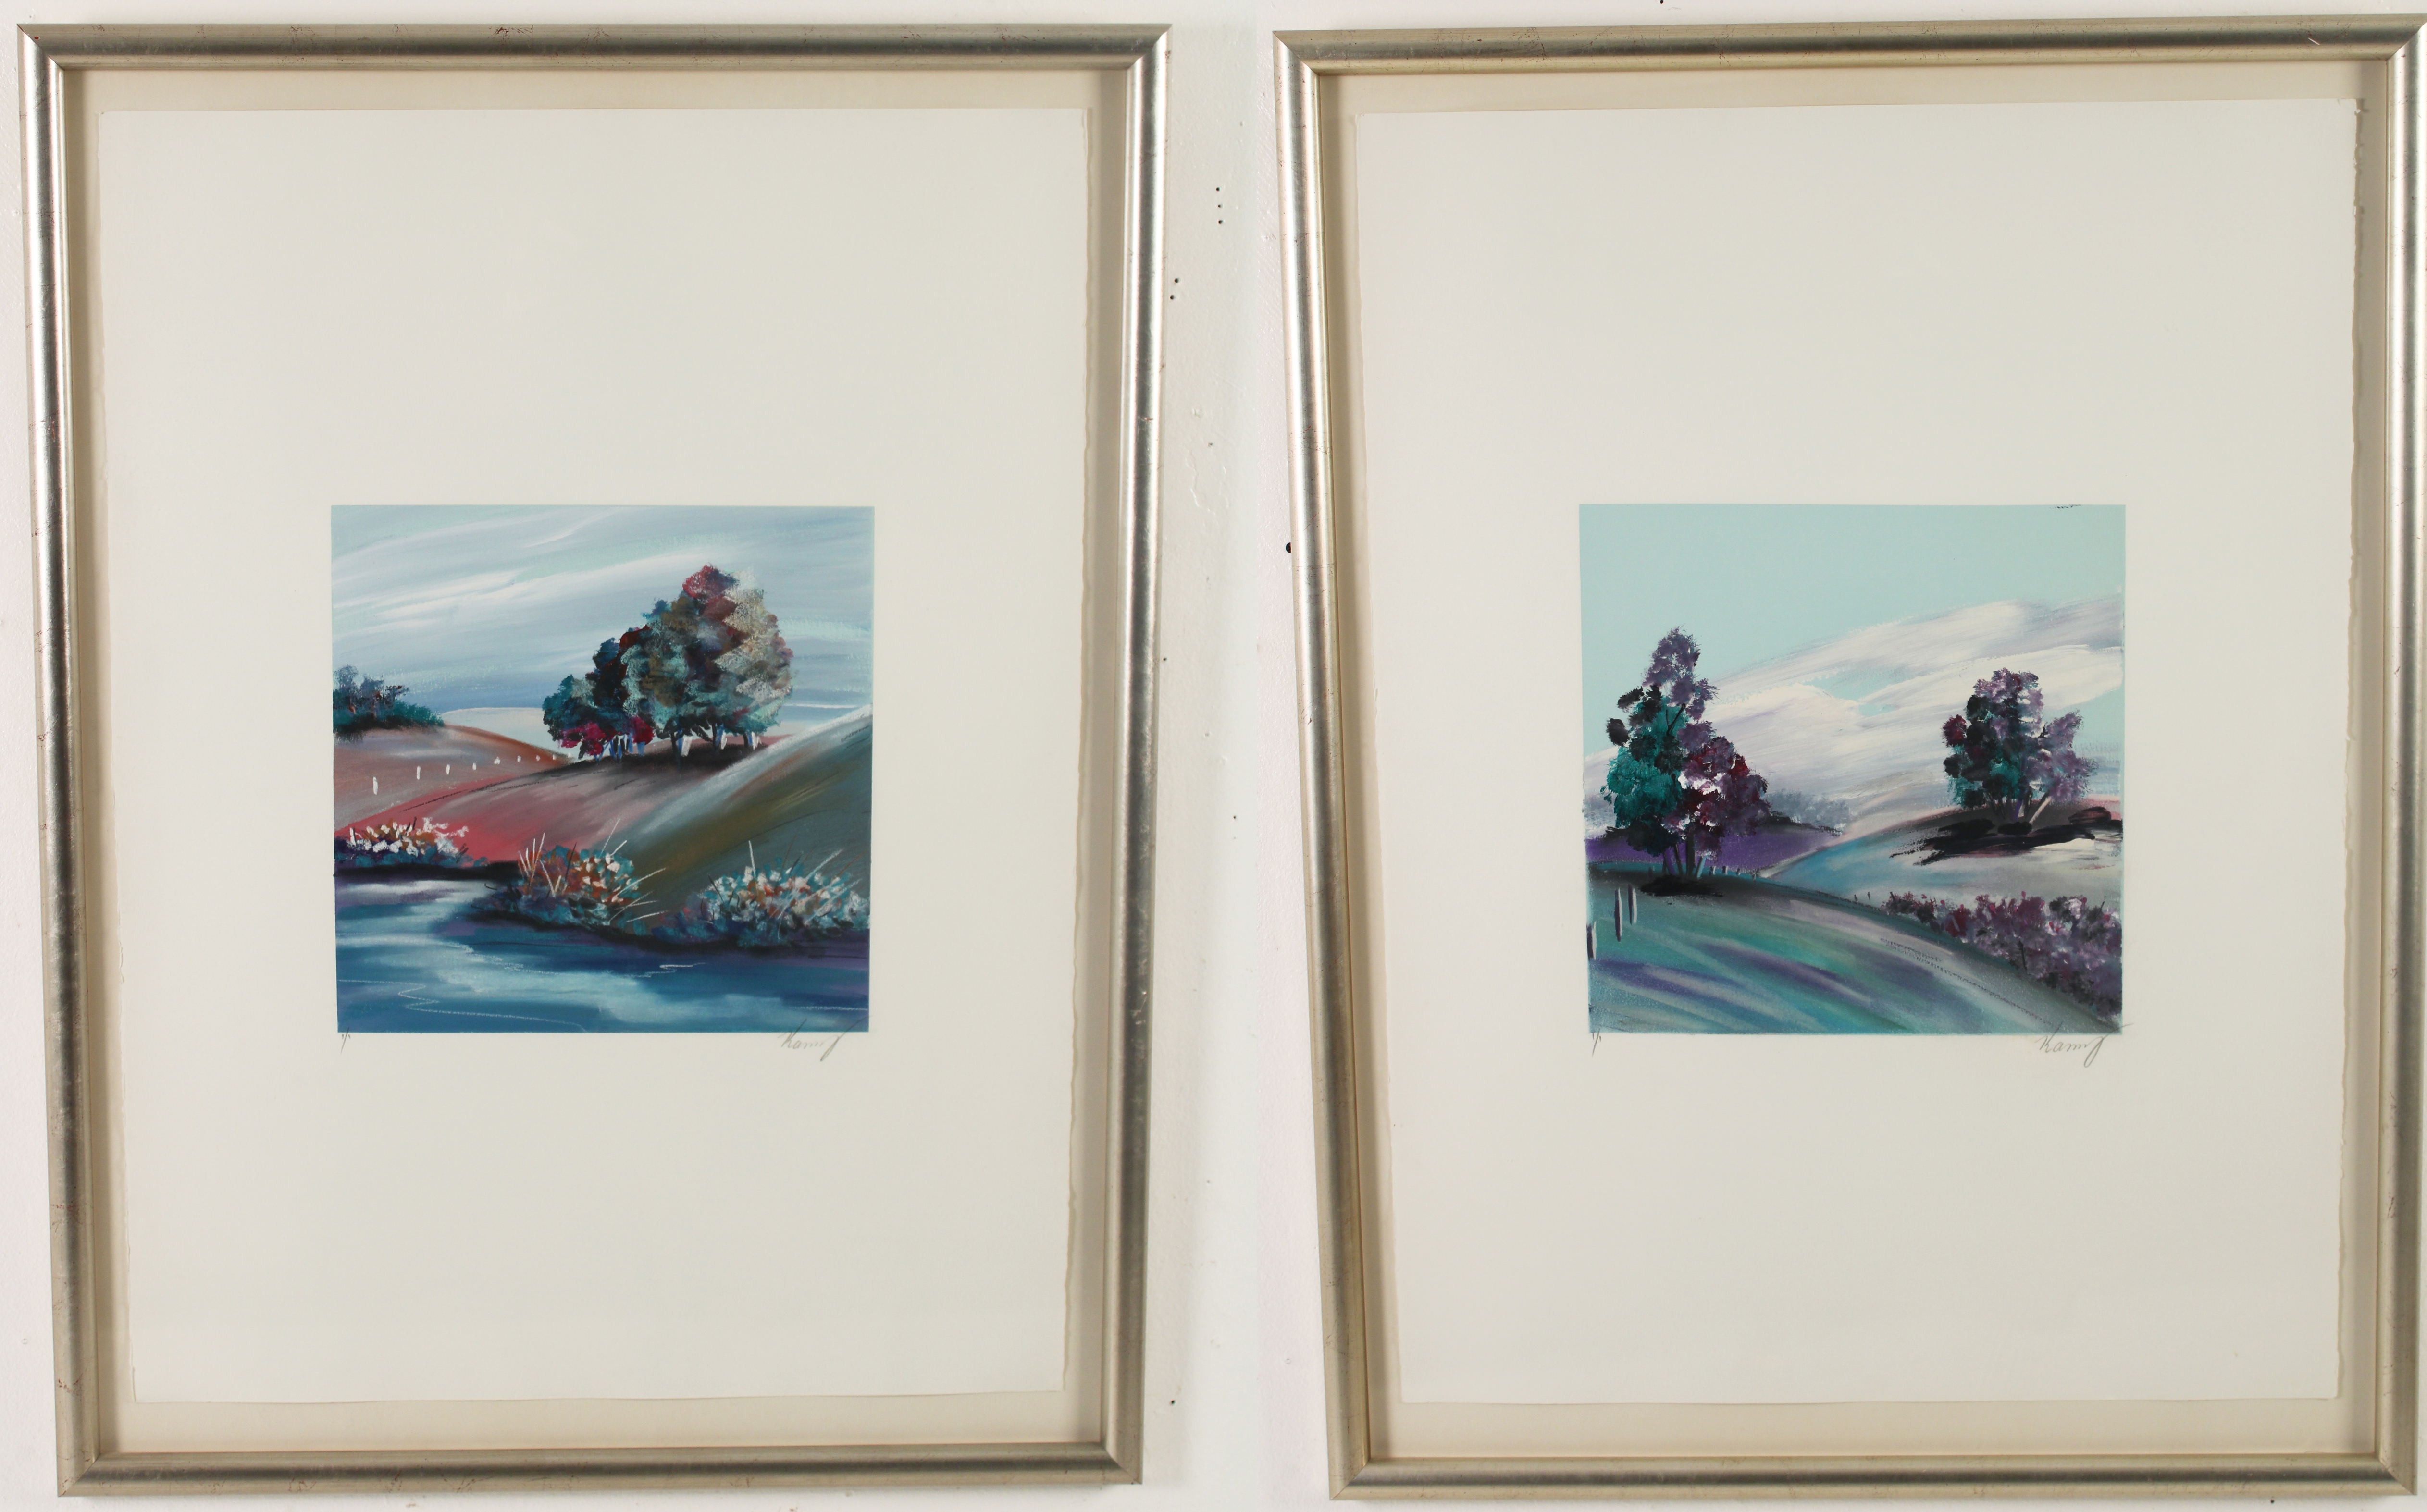 PAIR OF PENCIL SIGNED LITHOGRAPHS